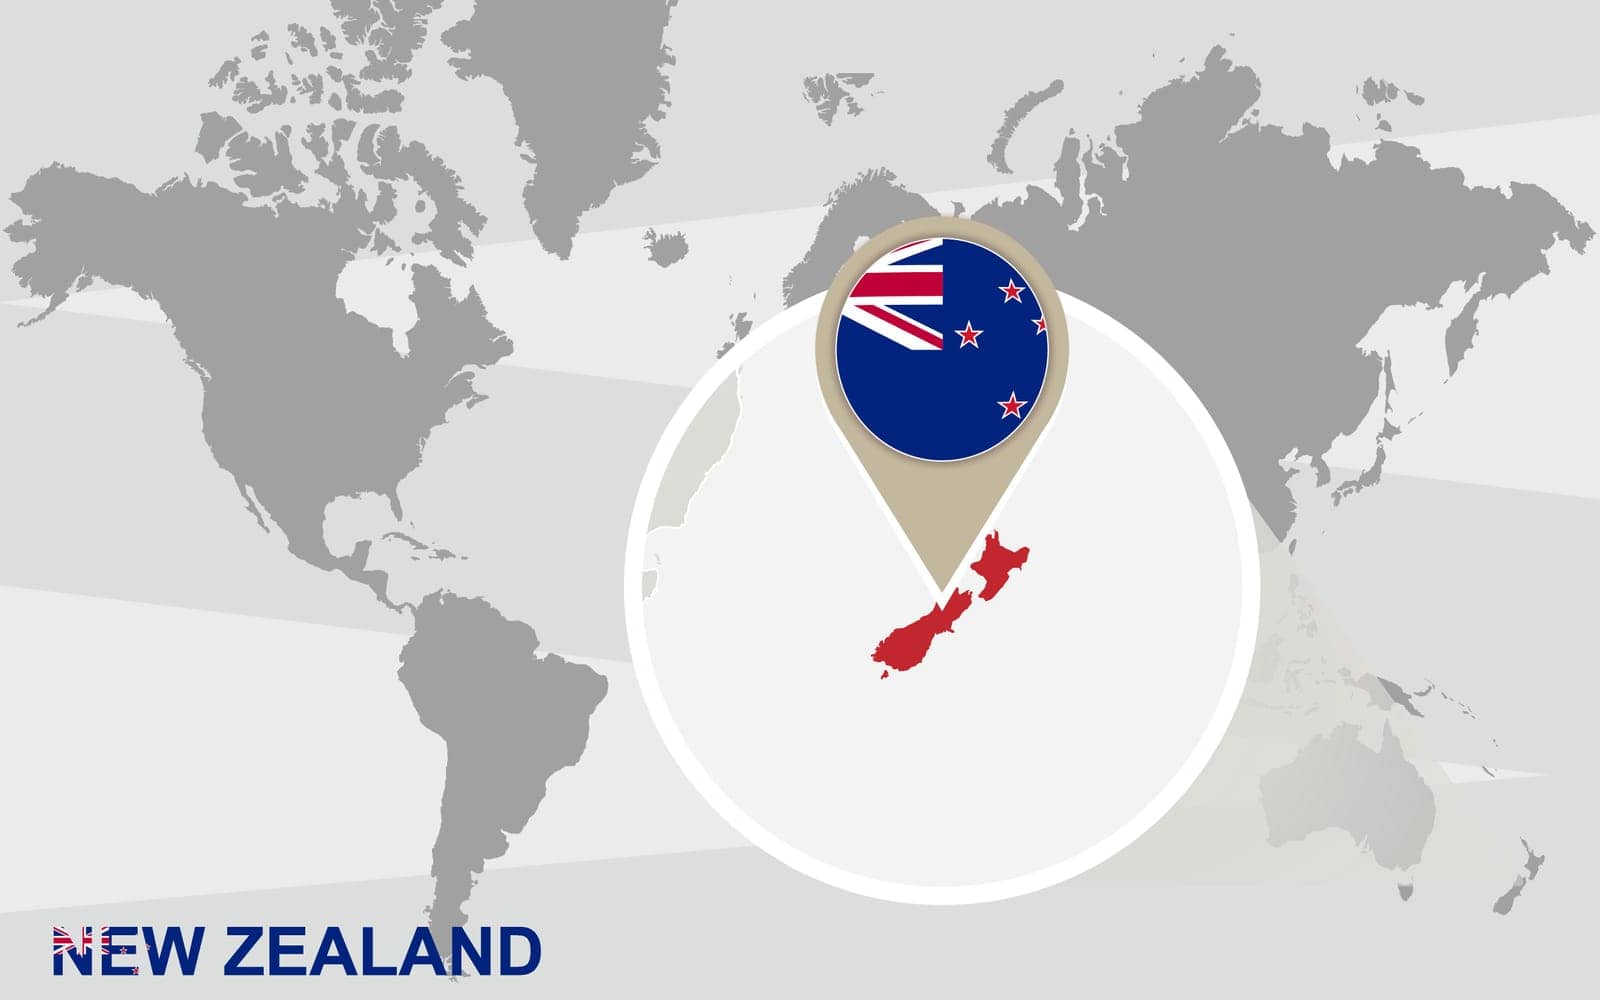 World map with magnified New Zealand. New Zealand flag and map.